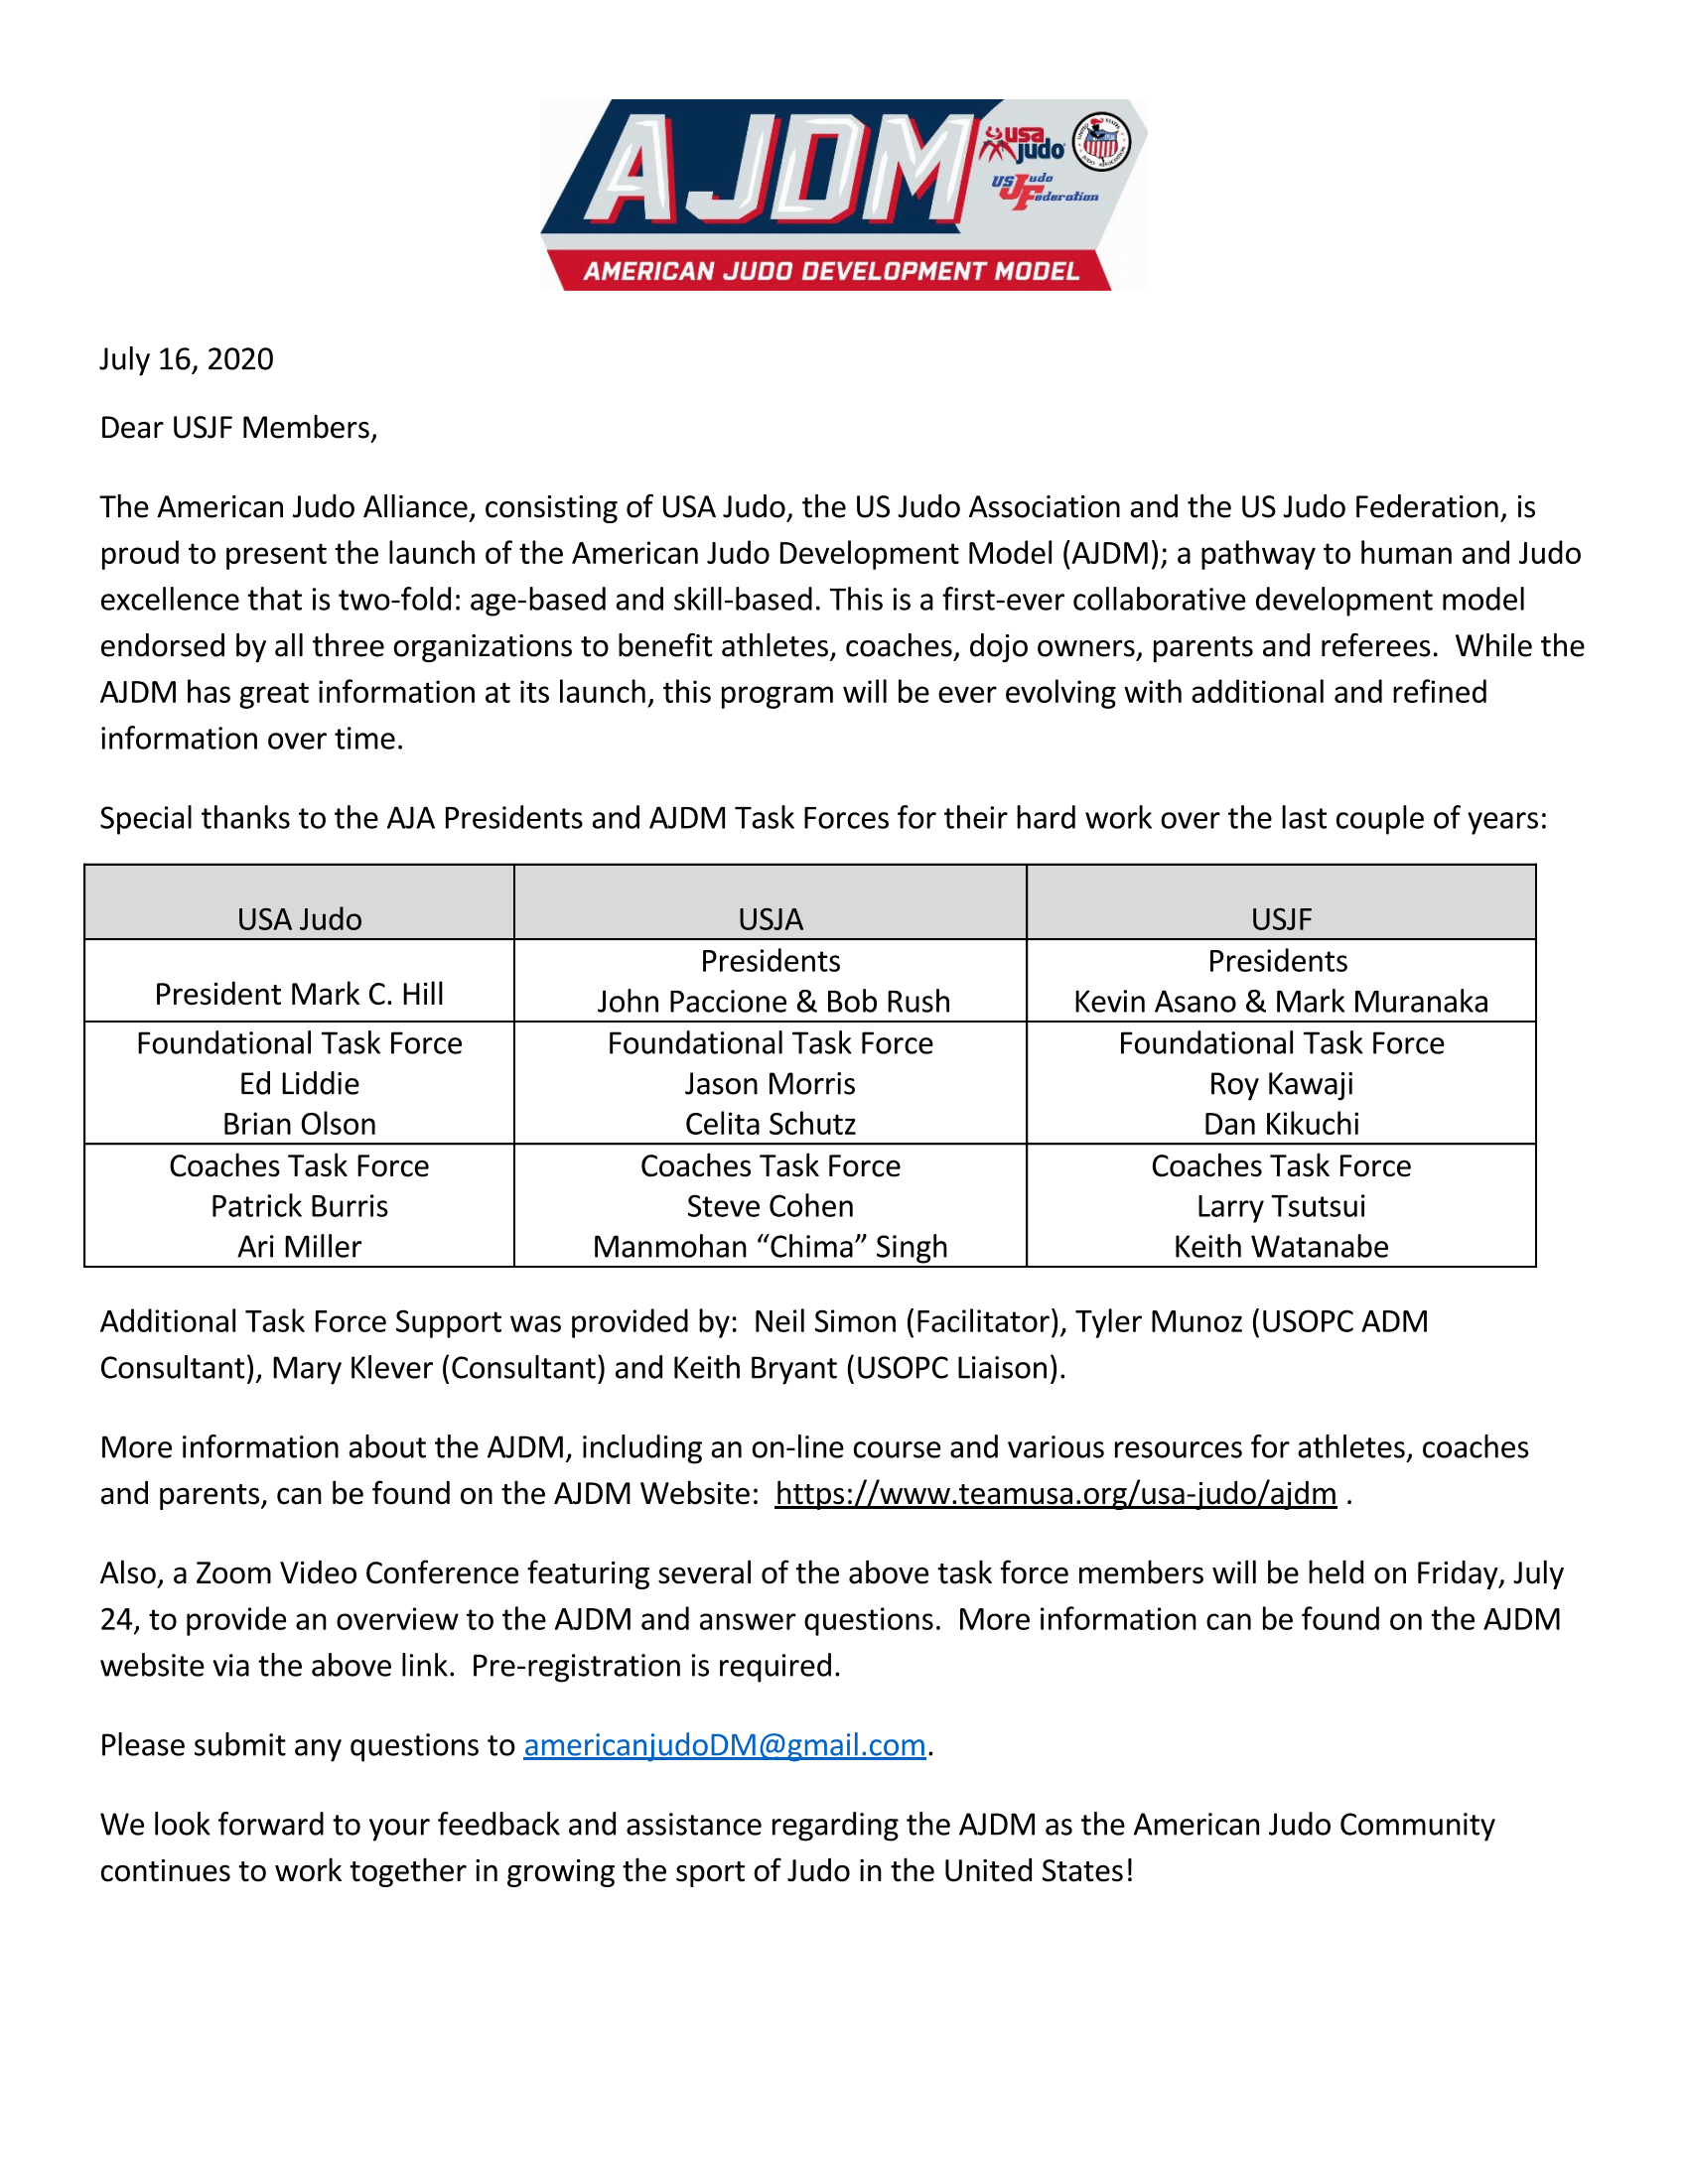 AJDM Letter to Members